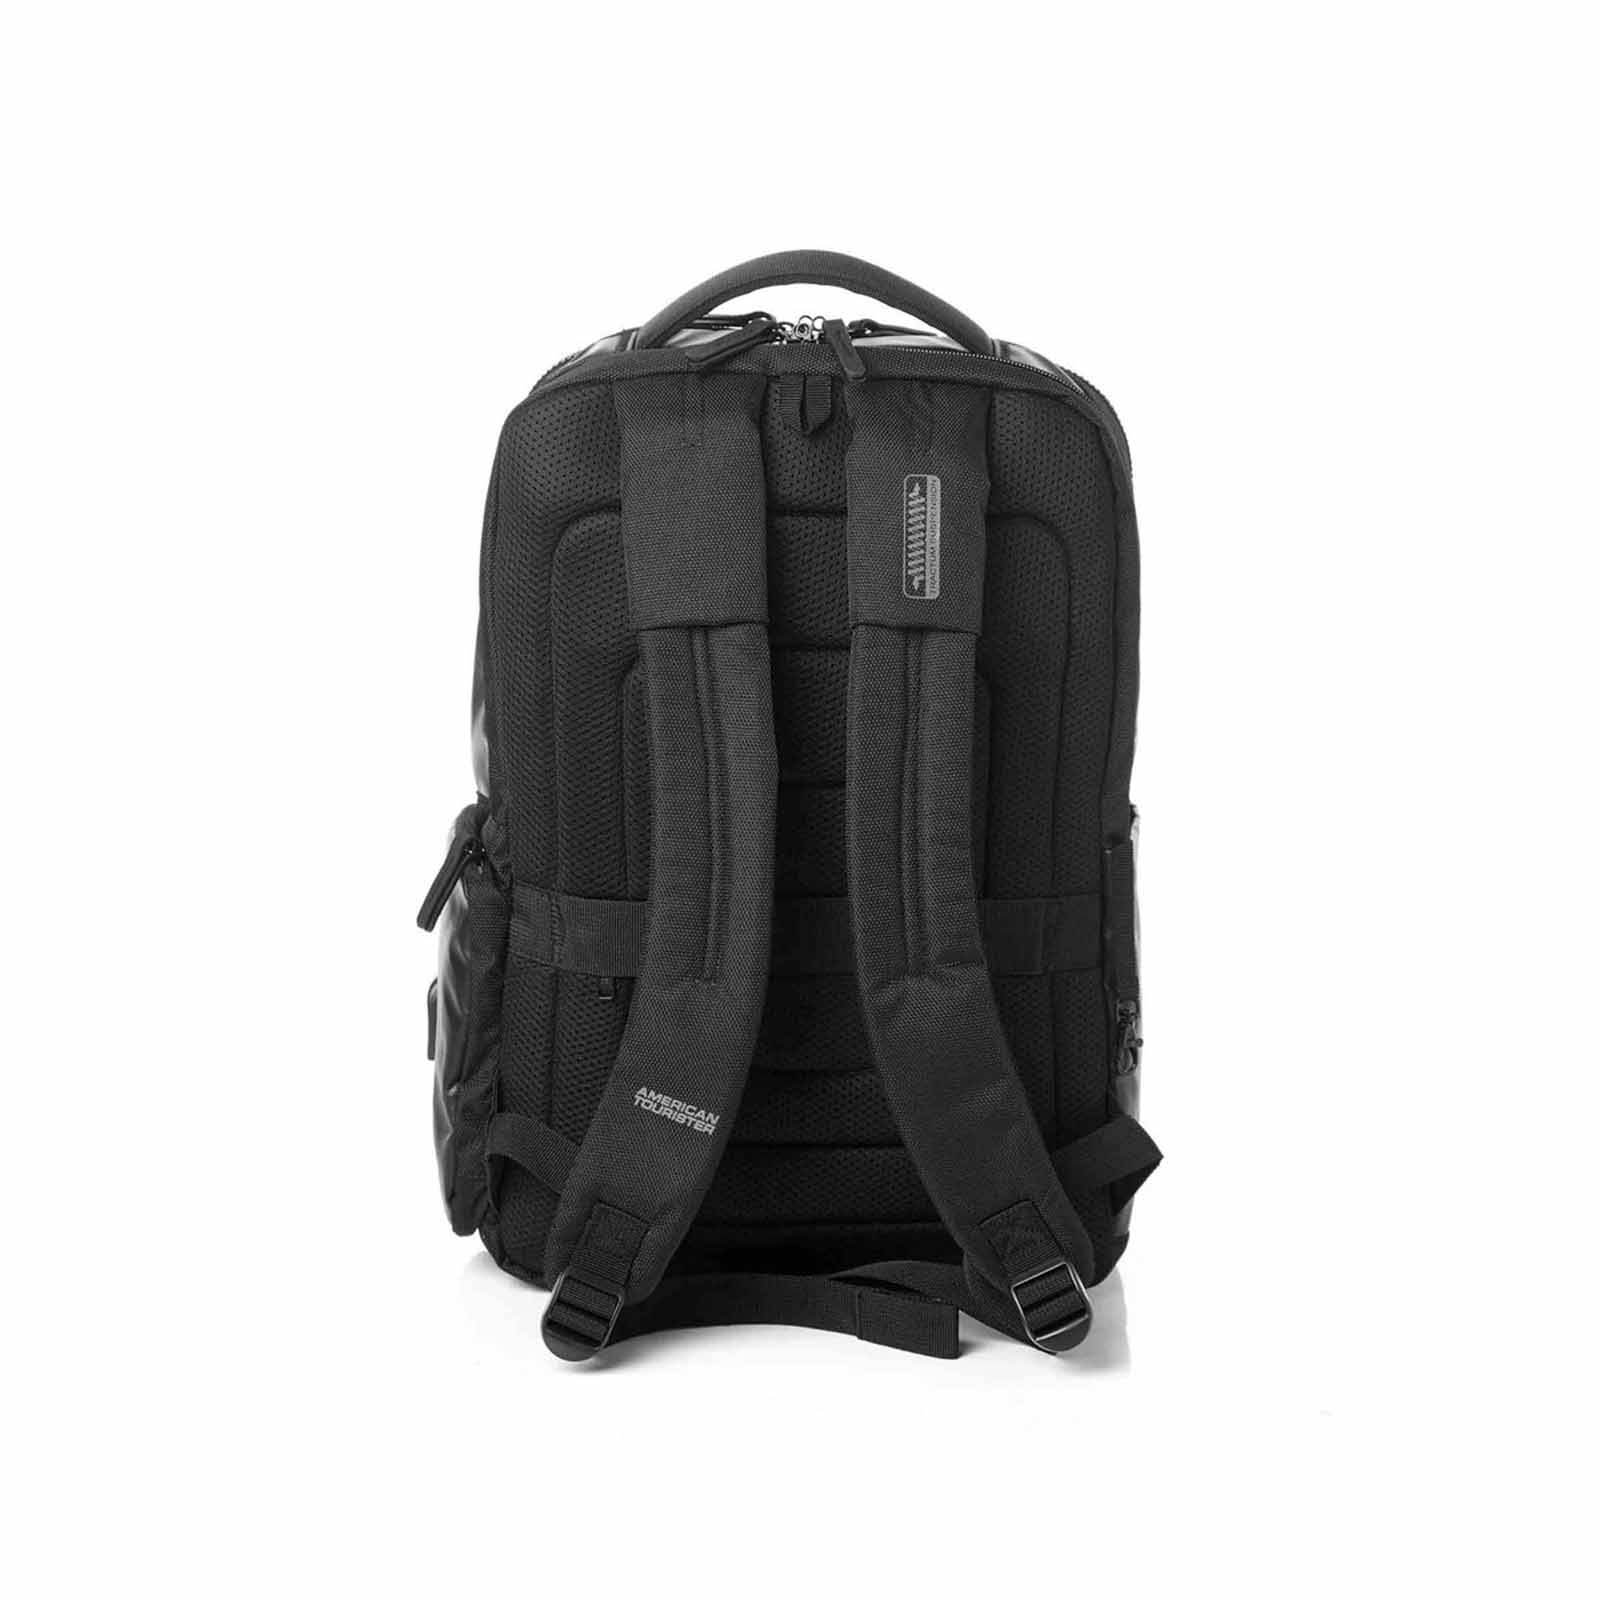 American-Tourister-Zork-15-Inch-Laptop-Backpack-Black-Harness